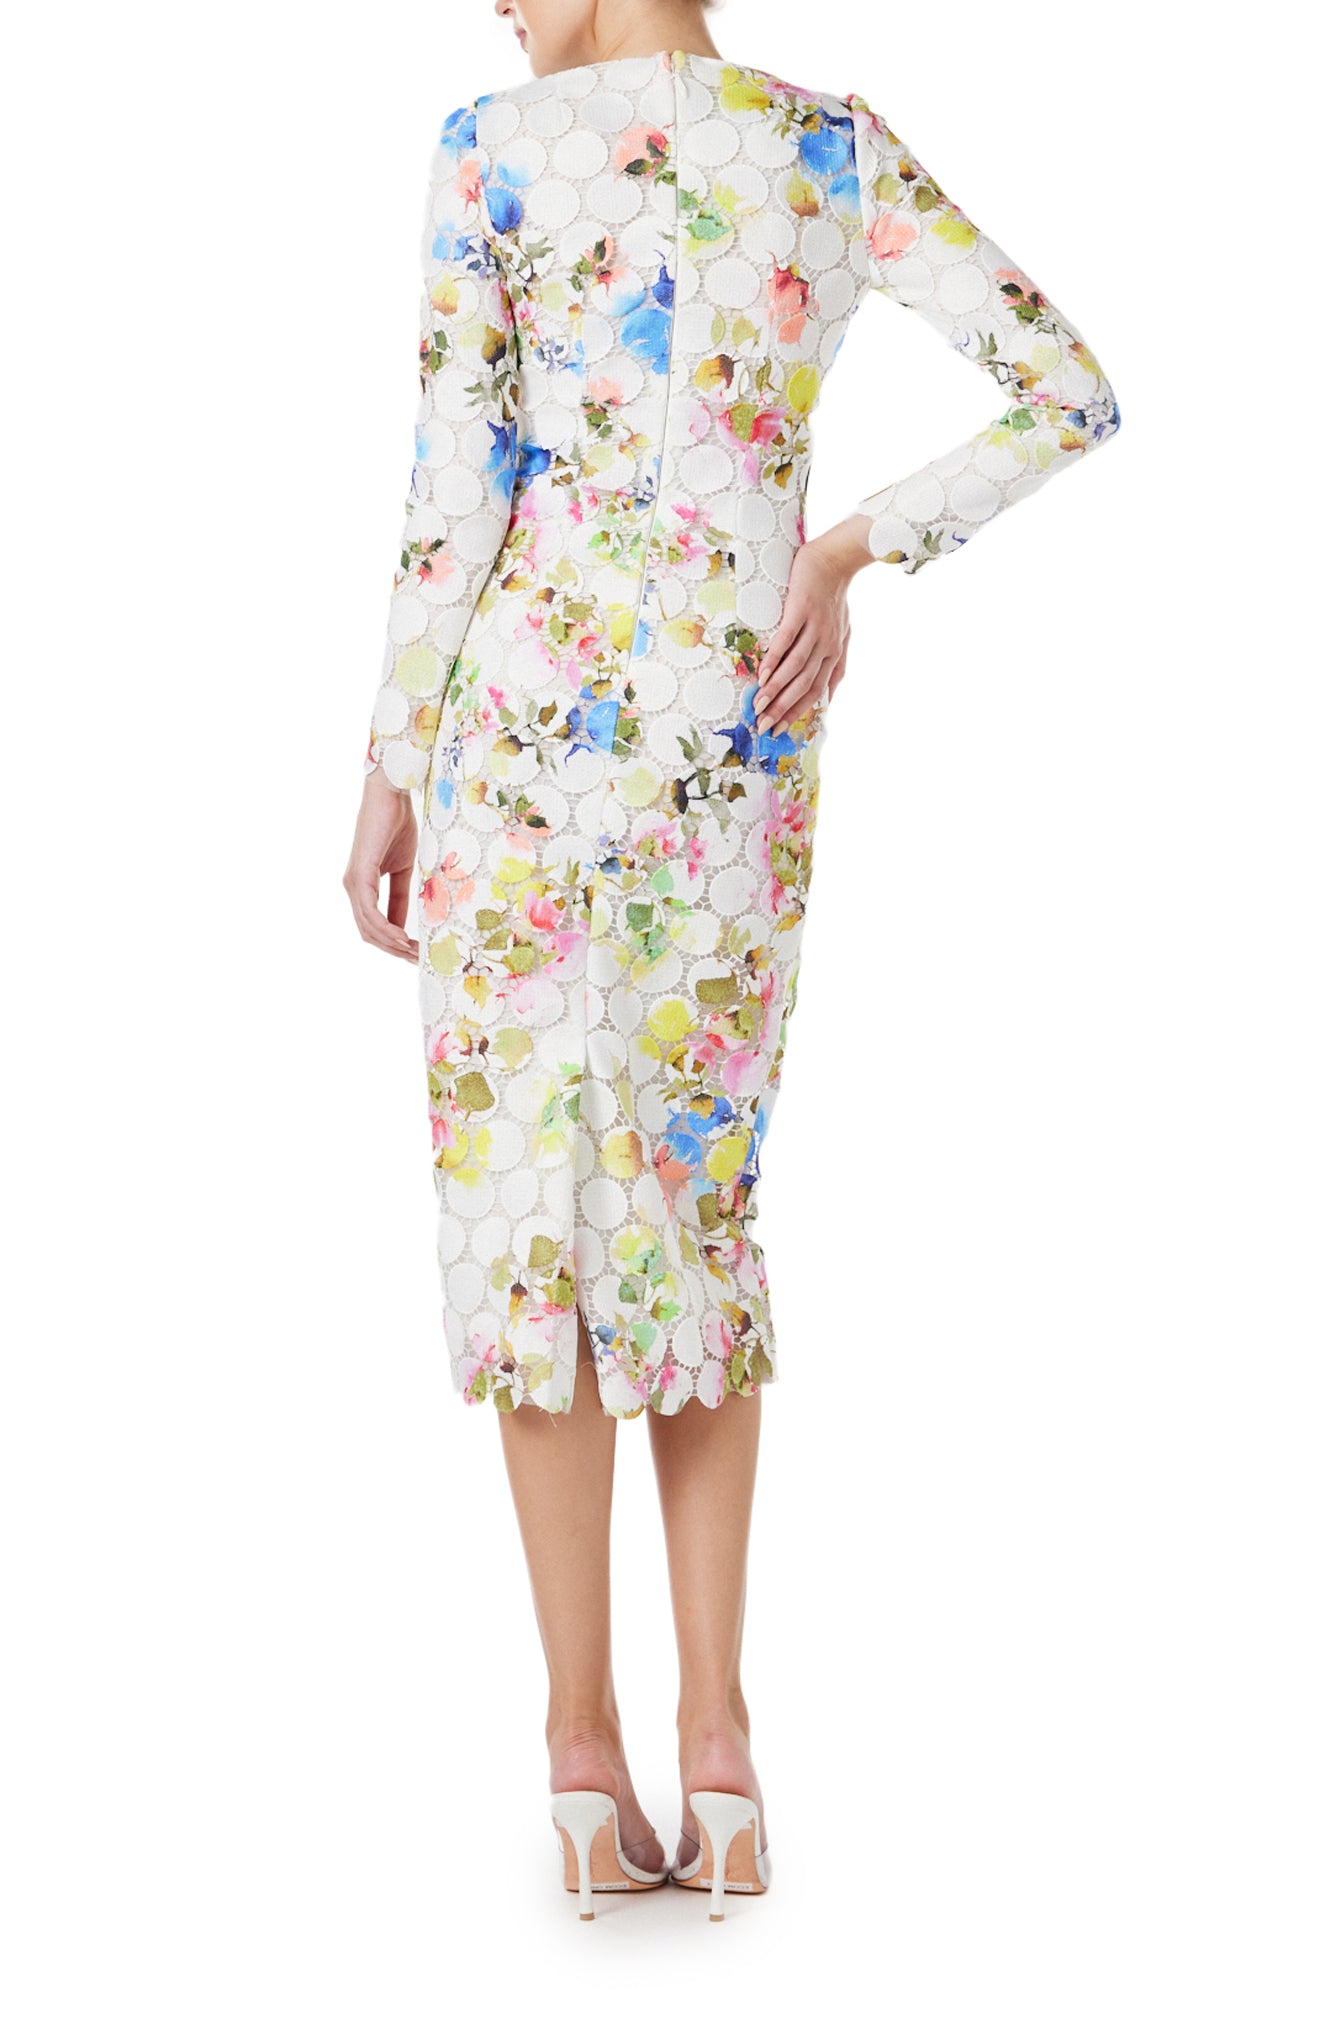 Monique Lhuillier Spring 2024 silk white floral printed circle lace, jewel neck long sleeve sheath with scallop edge at hem - back.